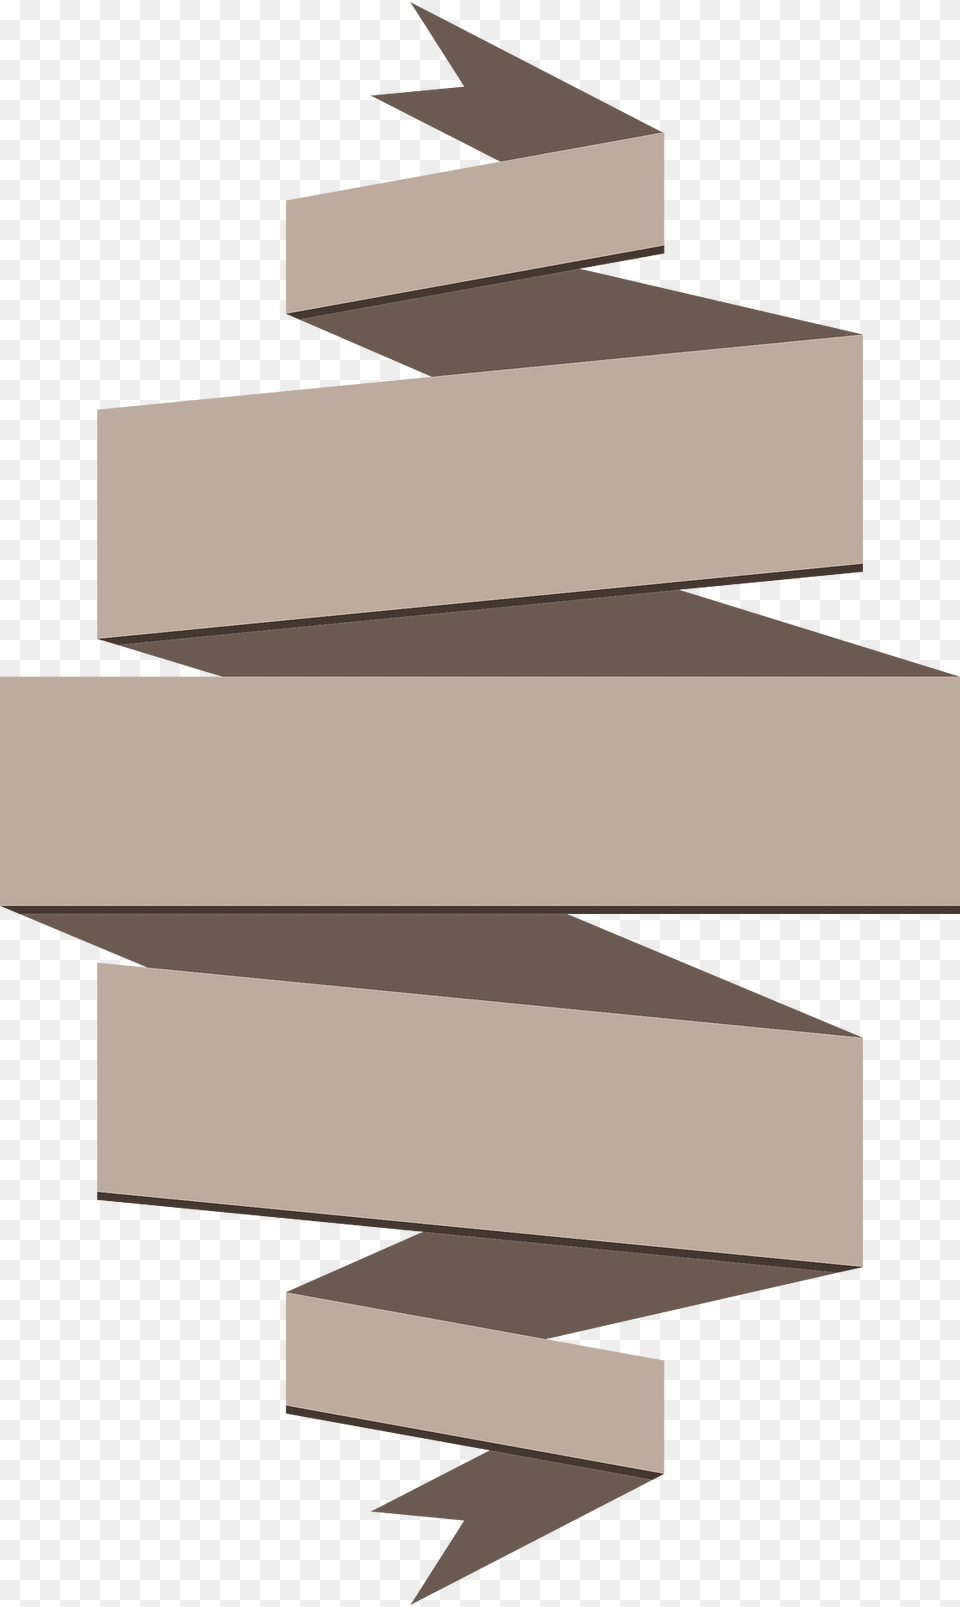 Tape Clipart, Brick, Plywood, Wood, Architecture Png Image